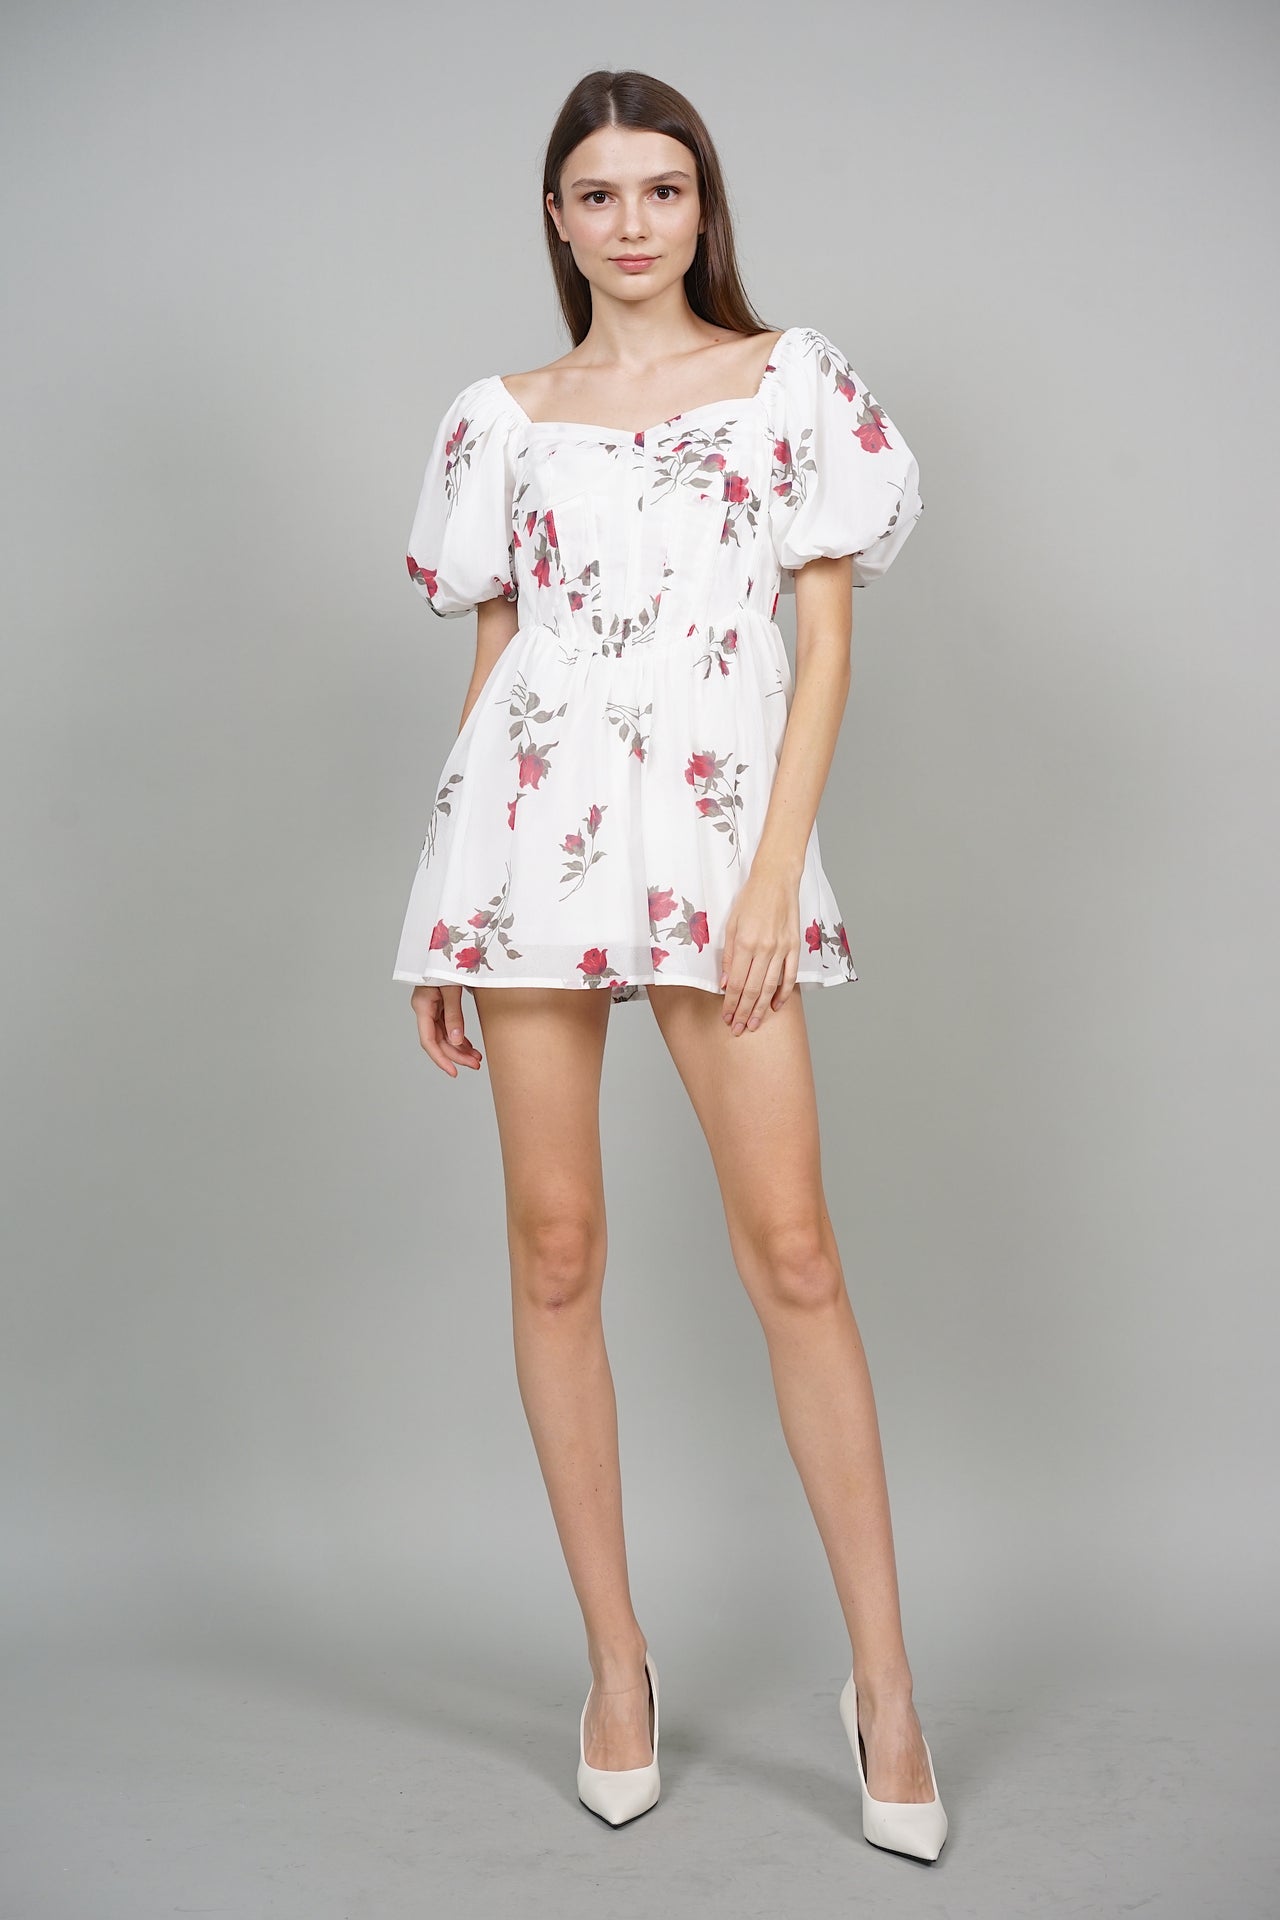 Kylie Corset Romper in White Floral